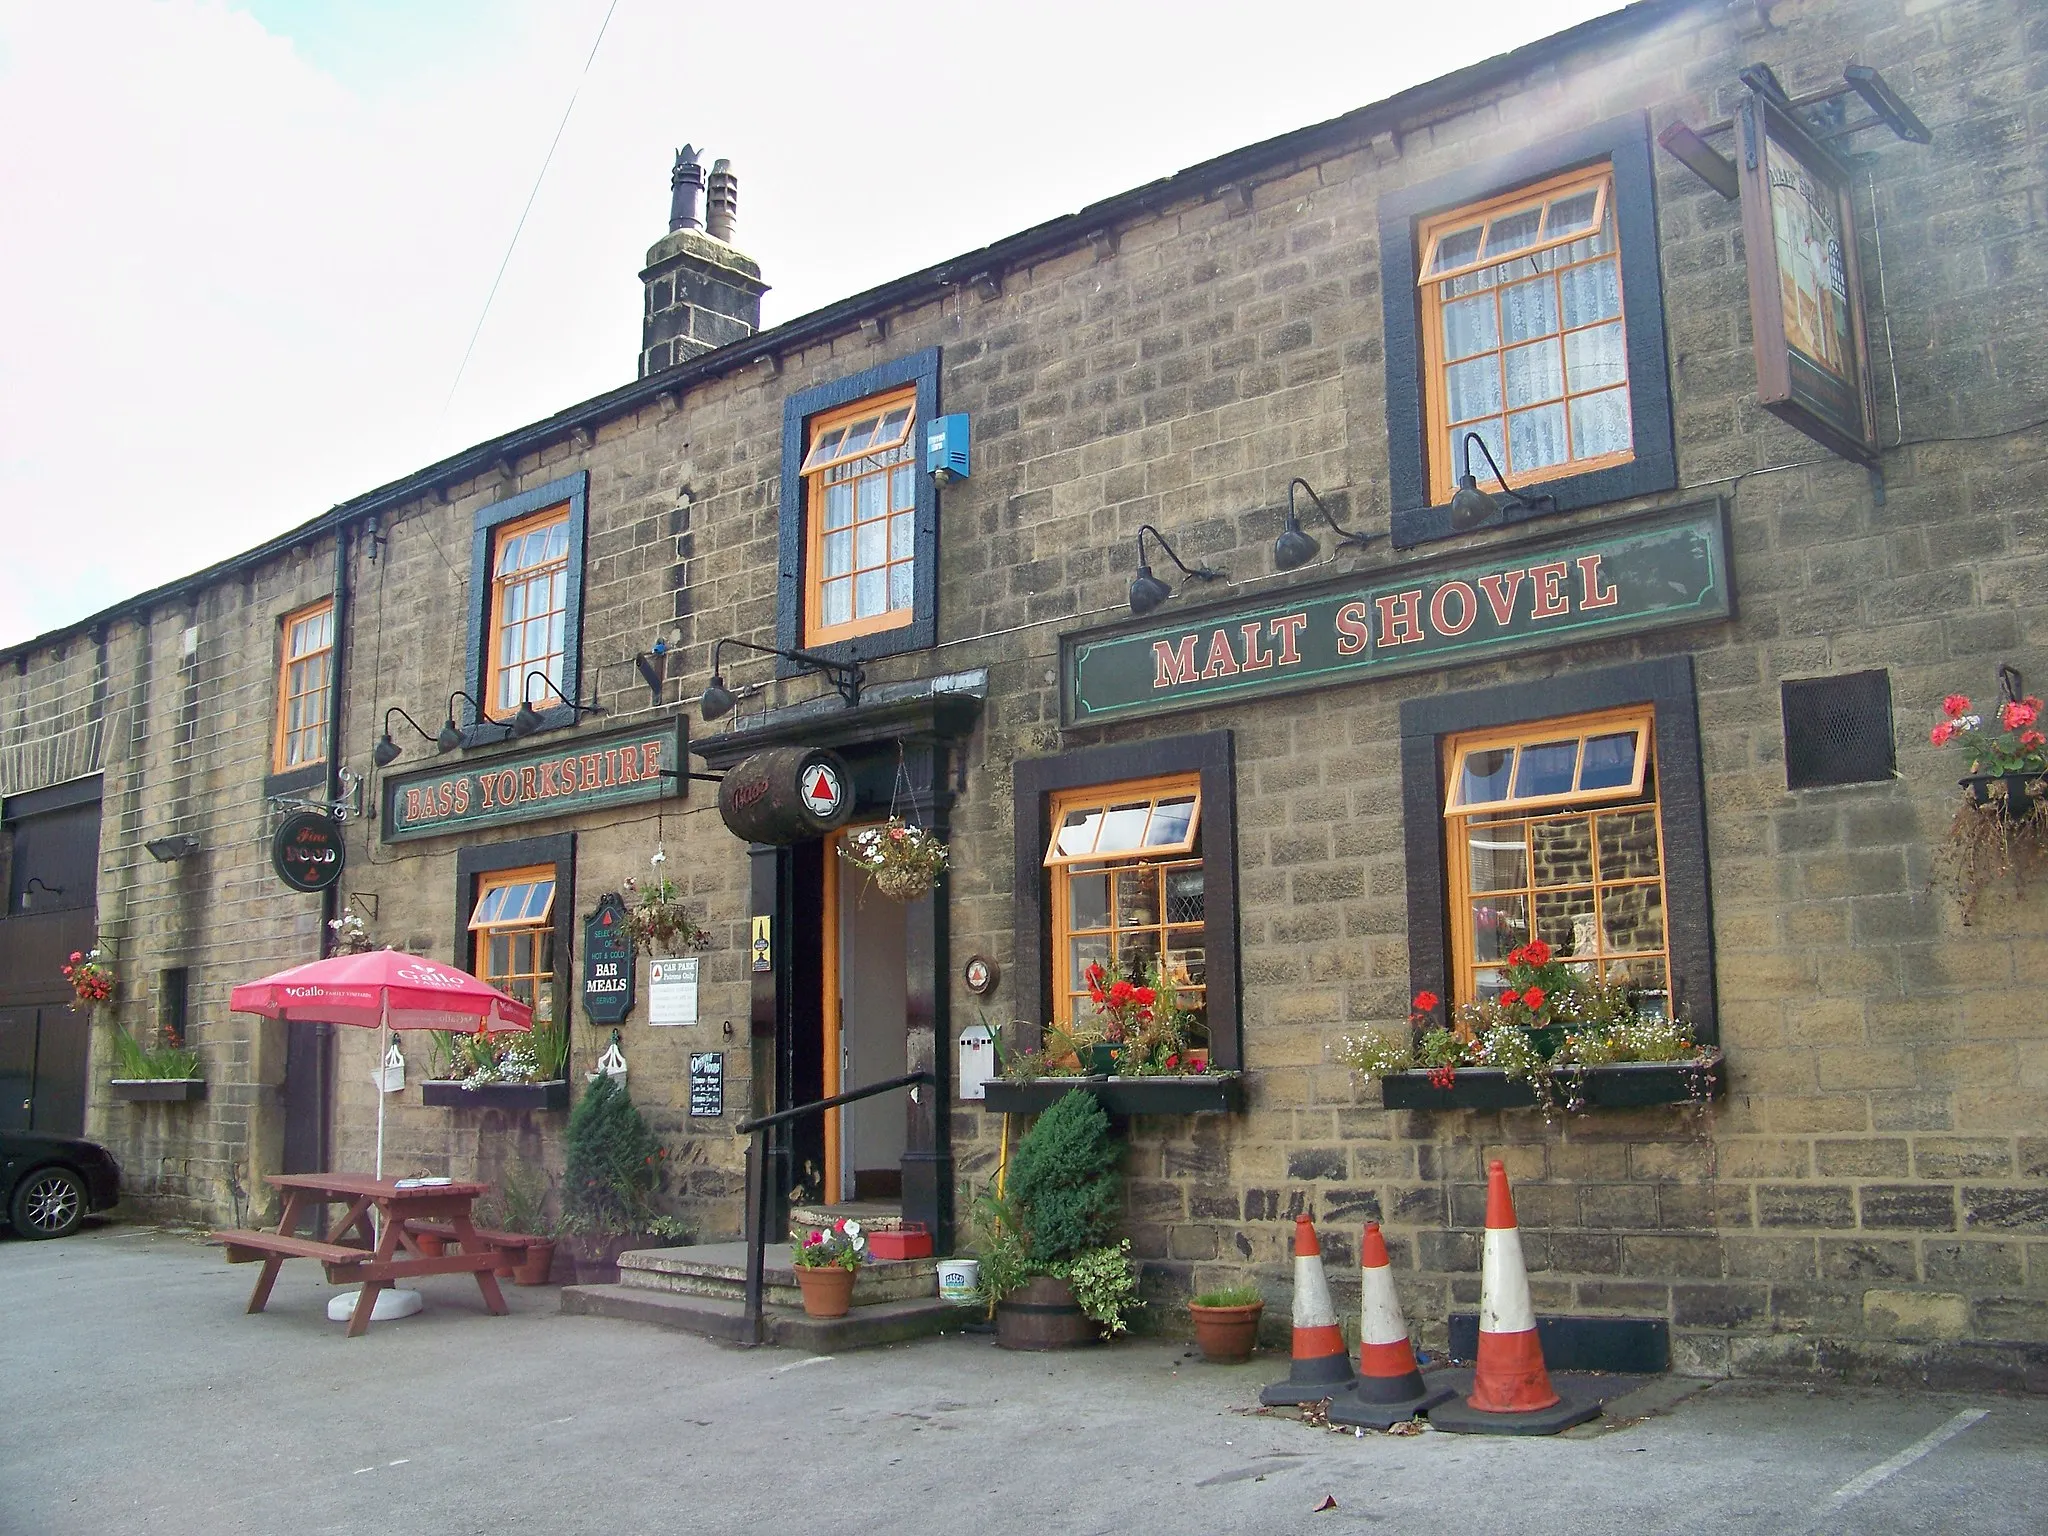 Photo showing: The Malt Shovel public house, Main Street, Menston, West Yorkshire.  Taken on the afternoon of Saturday 22nd August 2009.